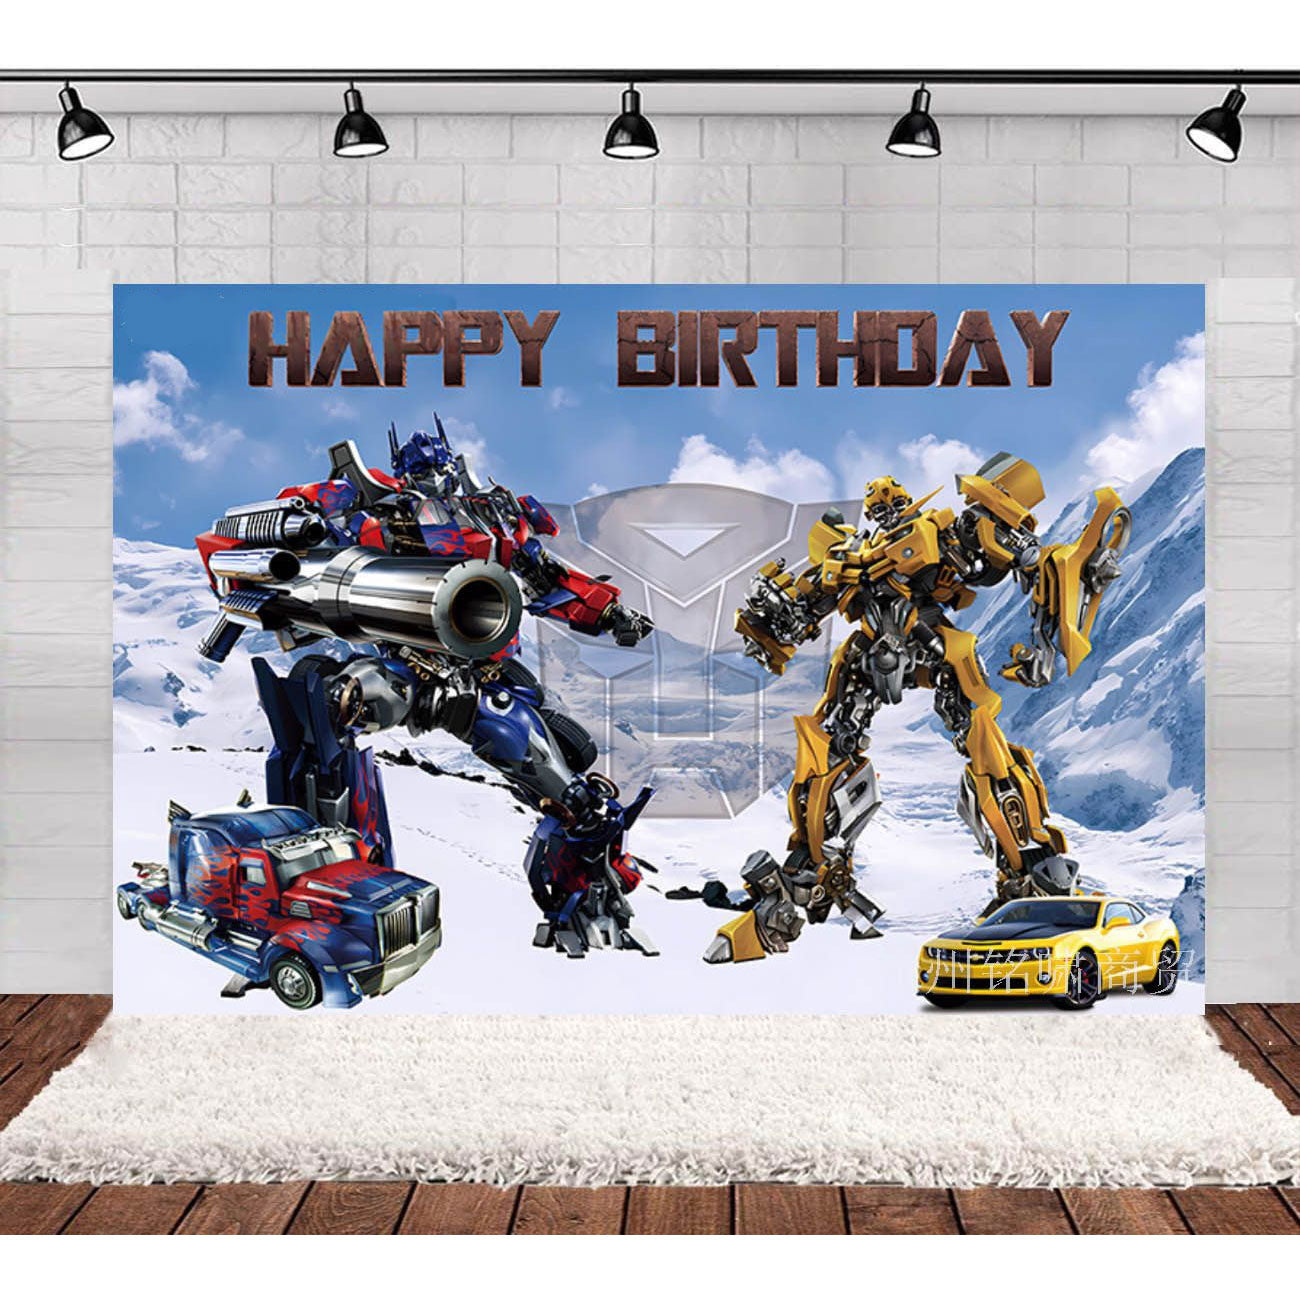 Transformers party backdrop can be done up quite easily with this fabric backdrop featuring Optimus Prime and Bumblebee.